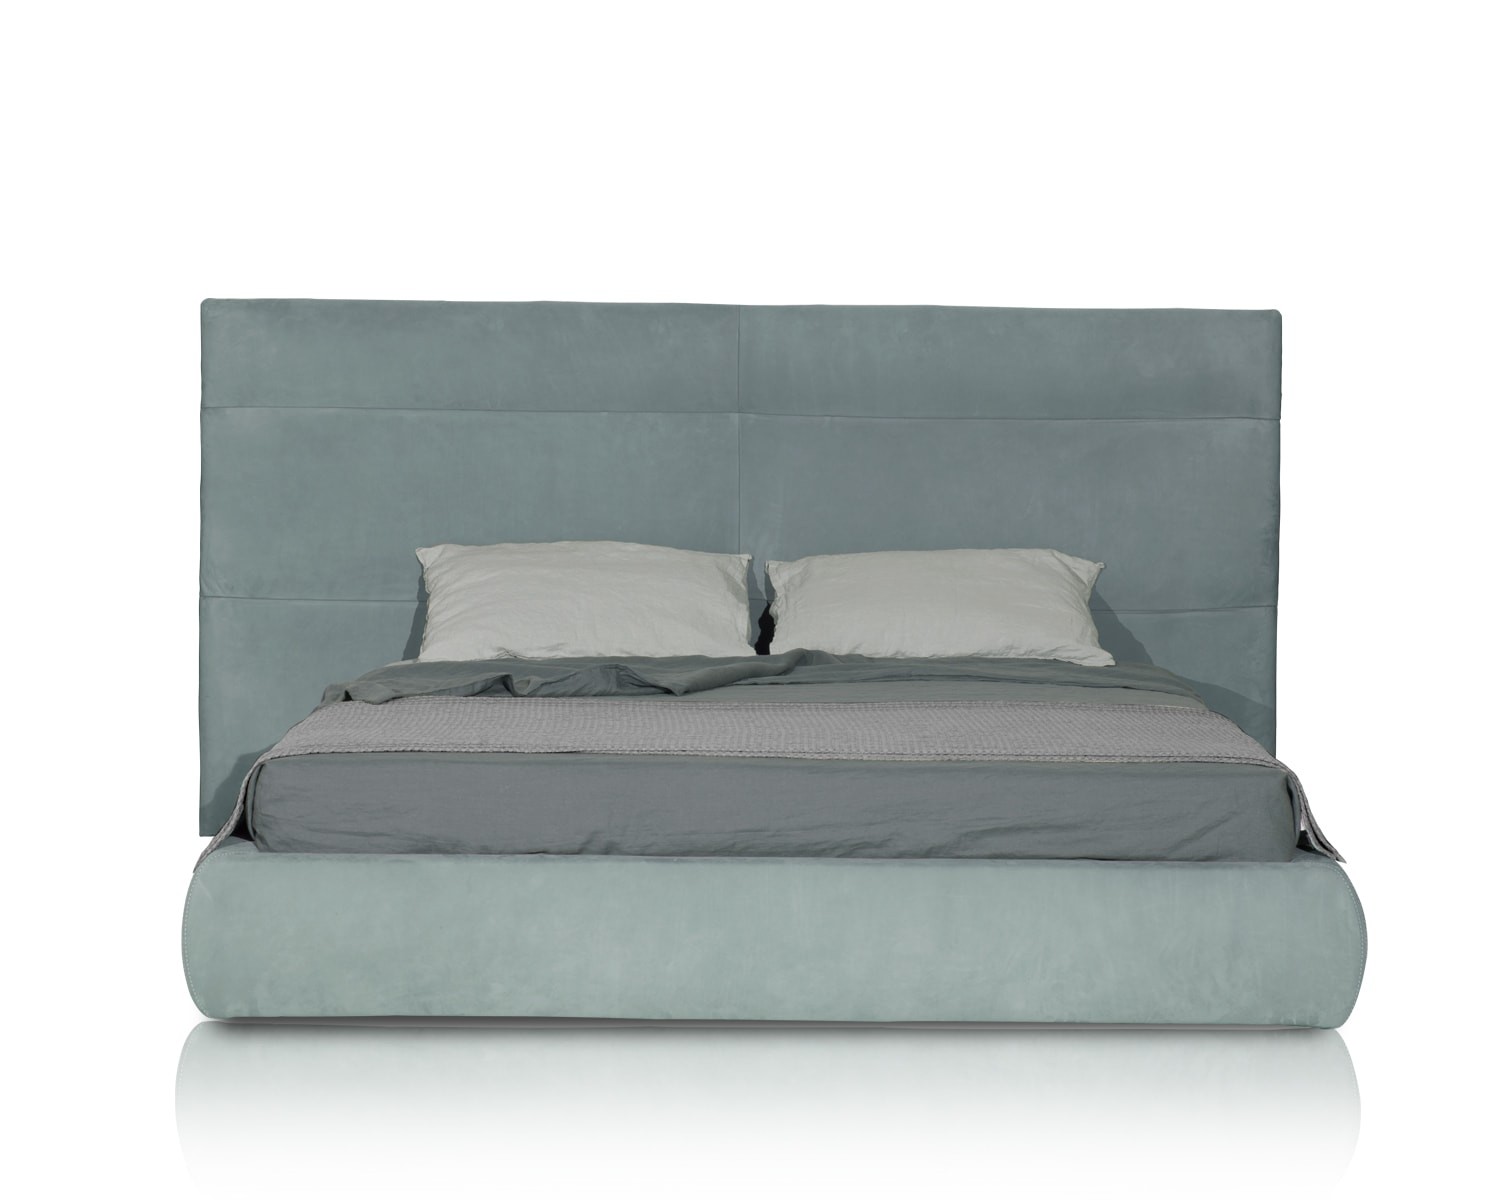 Couche Bed